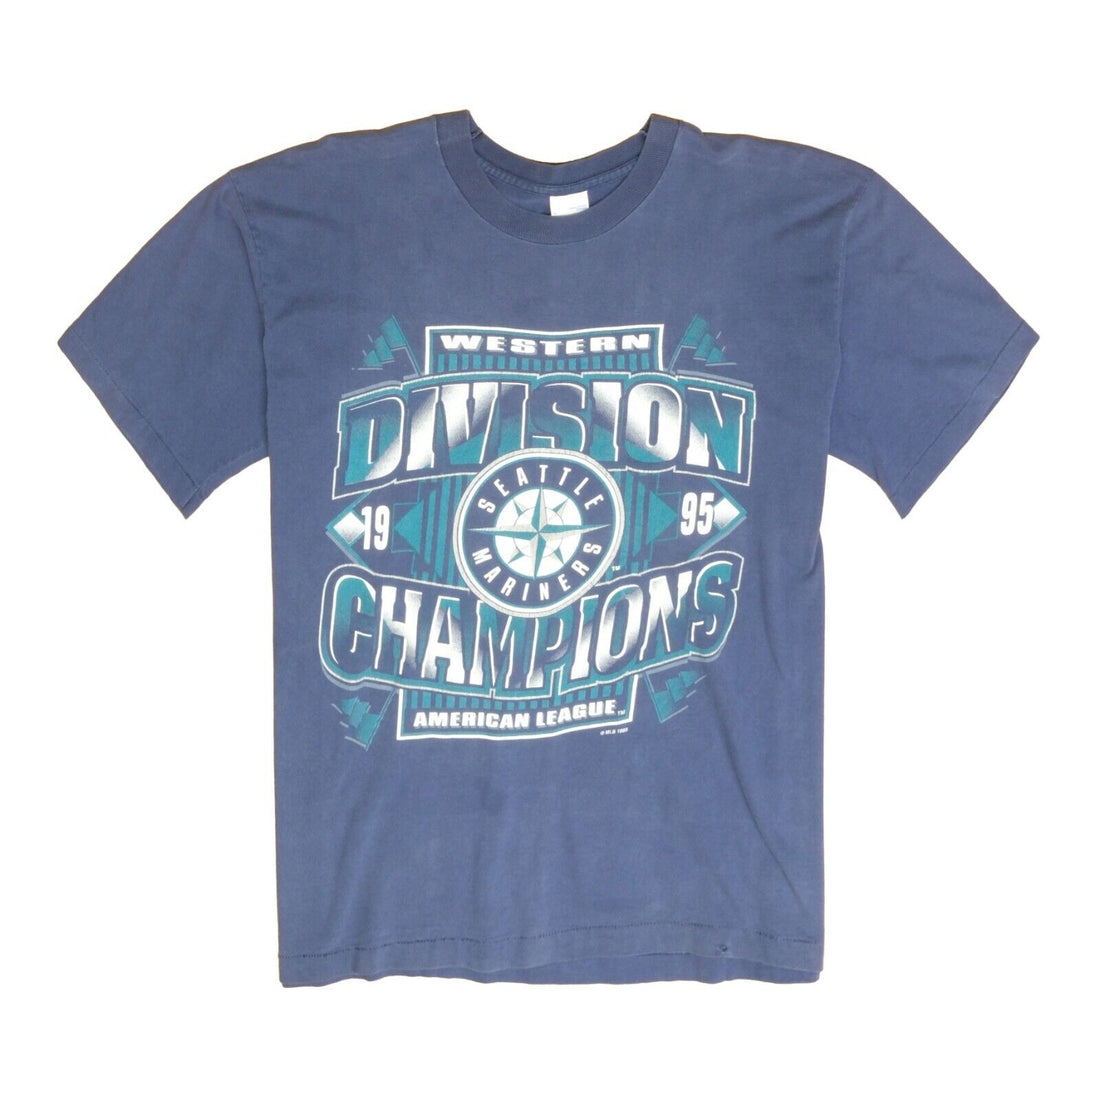 Vintage Seattle Mariners Western Division Champs T-Shirt Size Large 1995 90s MLB